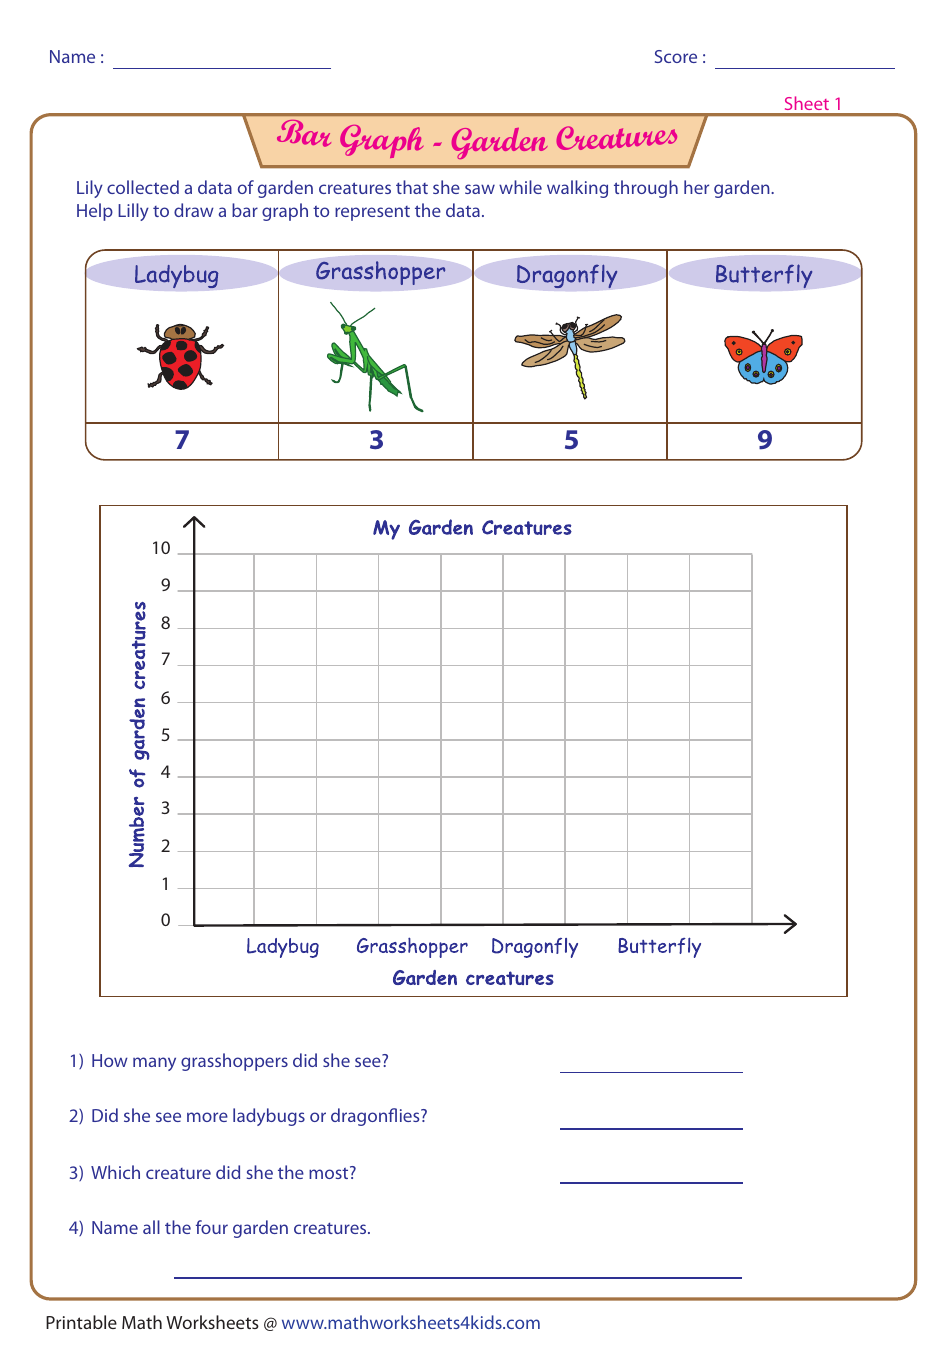 Garden Creatures Bar Graph Worksheet With Answer Key, Page 1